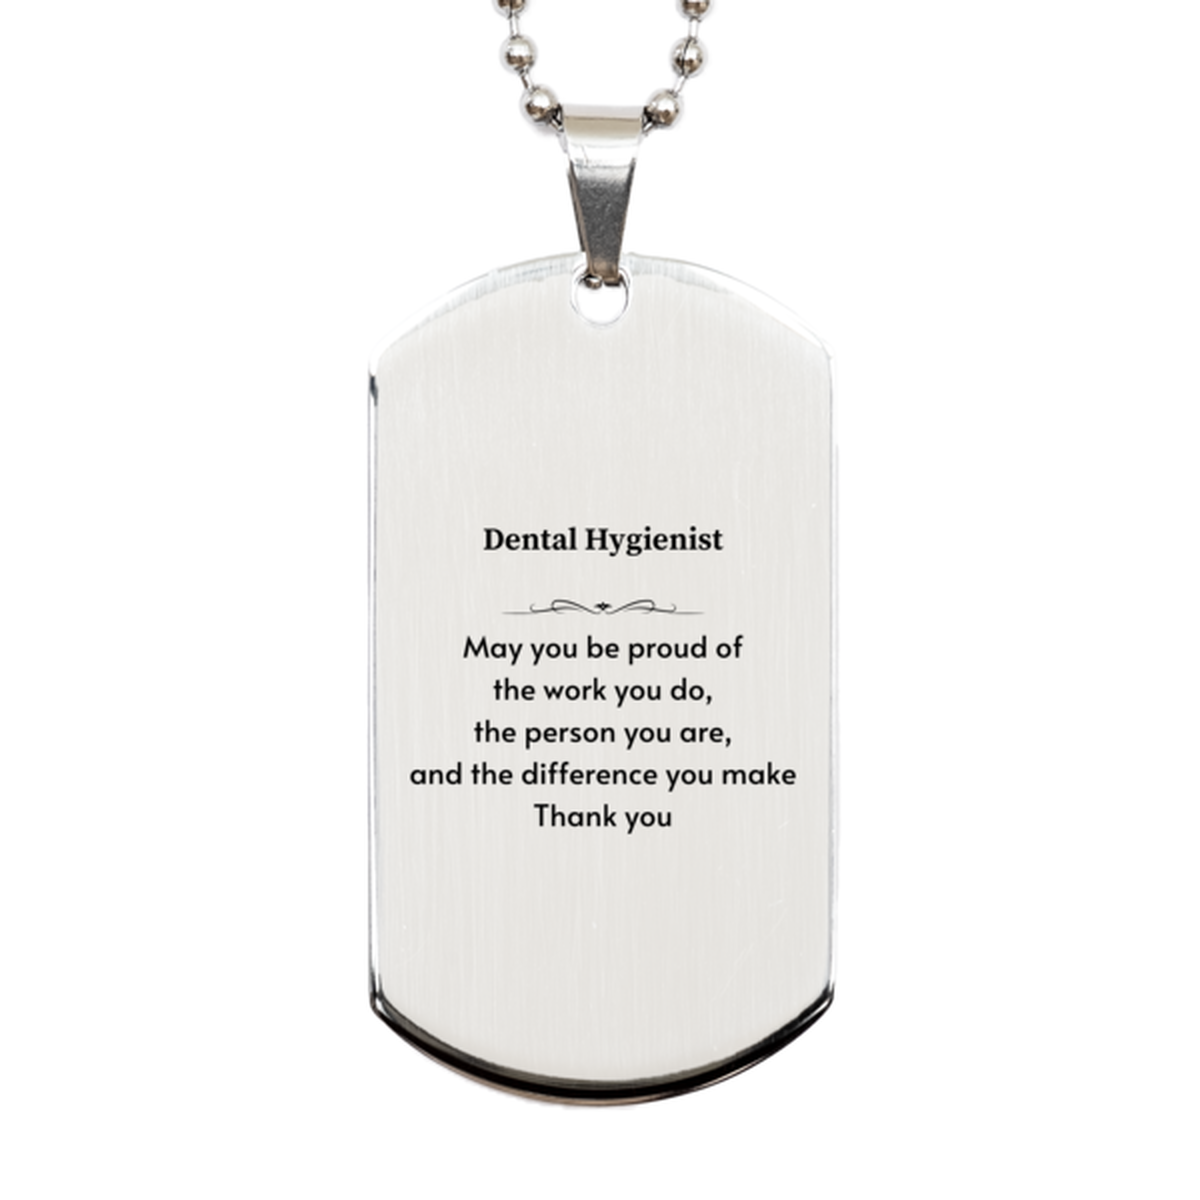 Heartwarming Silver Dog Tag Retirement Coworkers Gifts for Dental Hygienist, Dental Hygienist May You be proud of the work you do, the person you are Gifts for Boss Men Women Friends